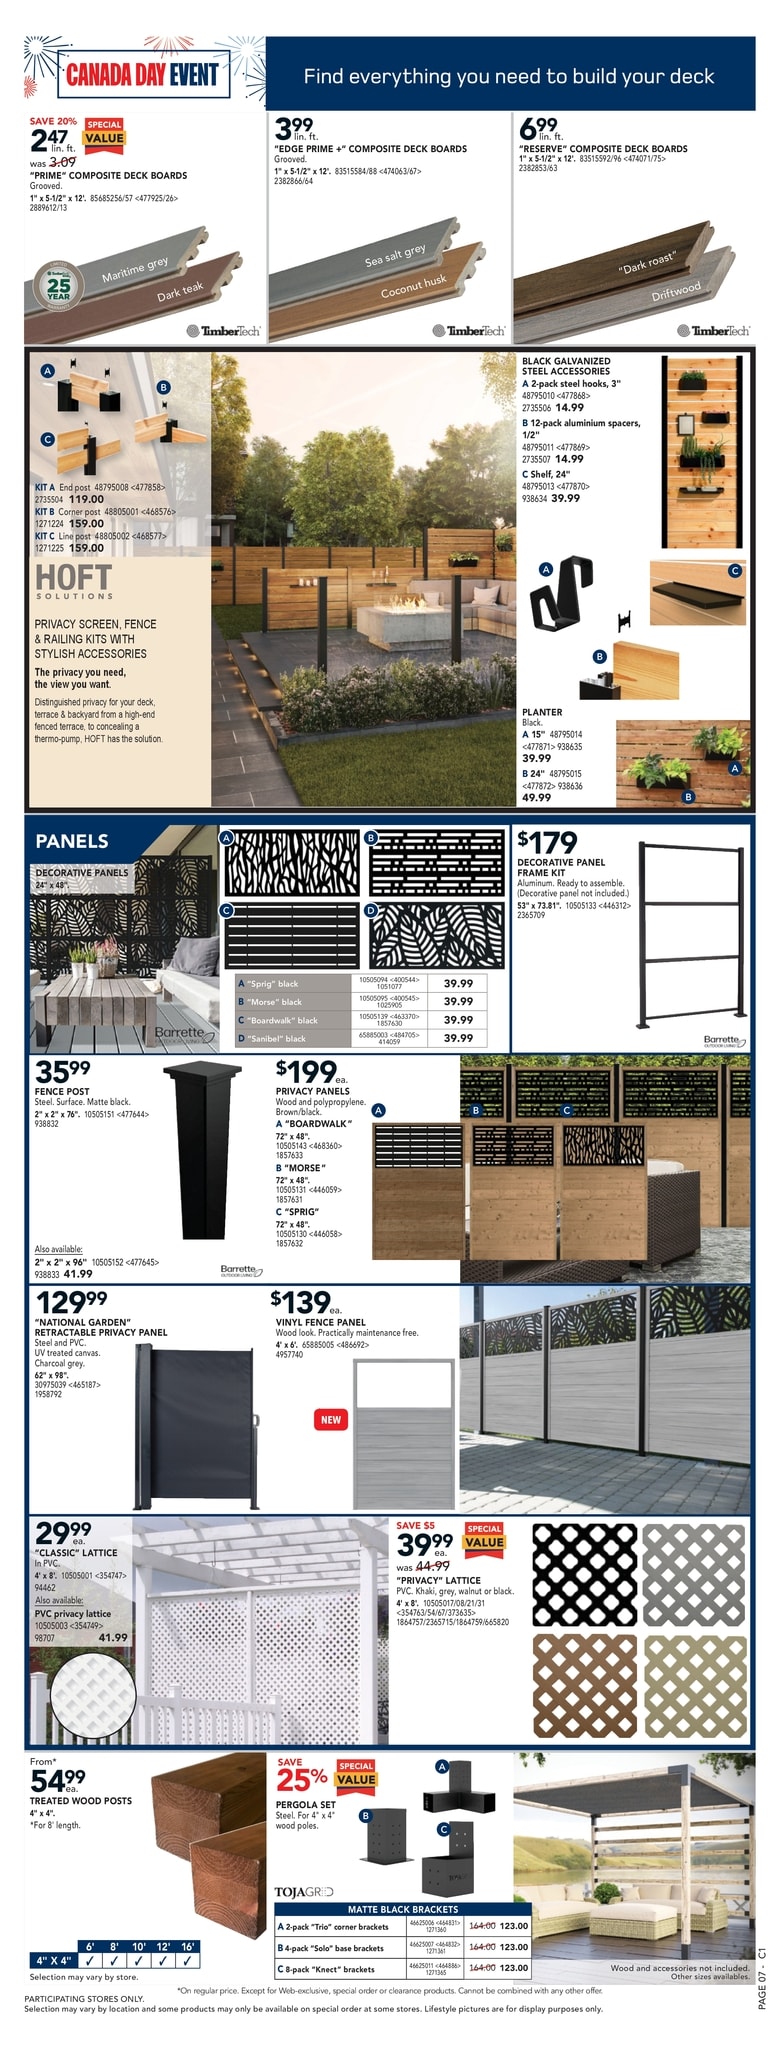 Rona - Weekly Flyer Specials - Page 10